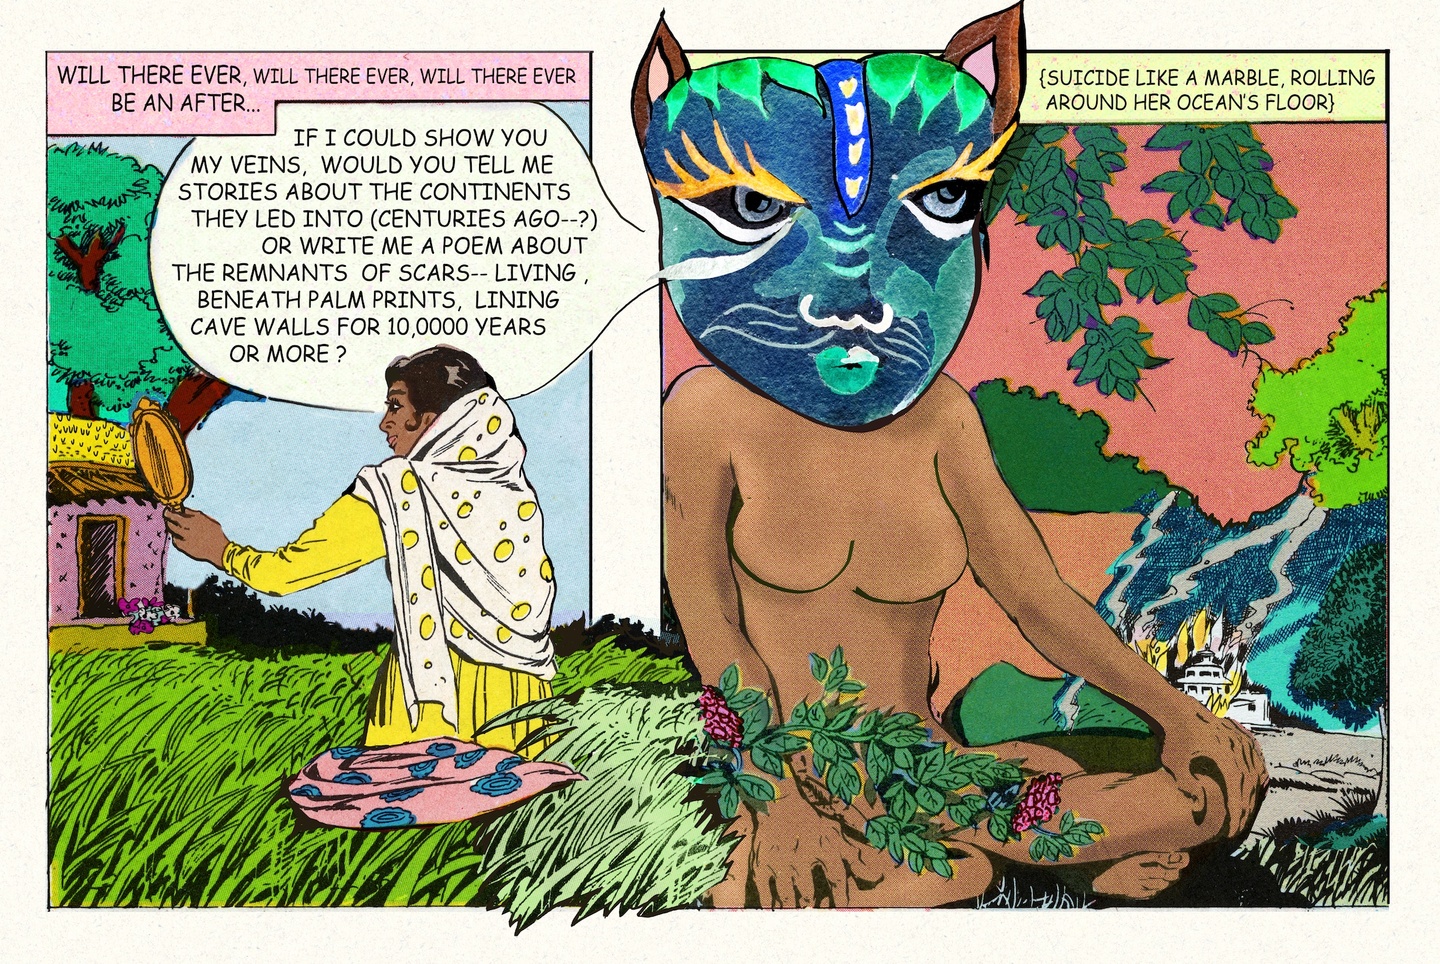 Comic panels featuring a person outside, looking in a hand mirror to the left, and a bigger figure with a blue and green cat mask to the right.